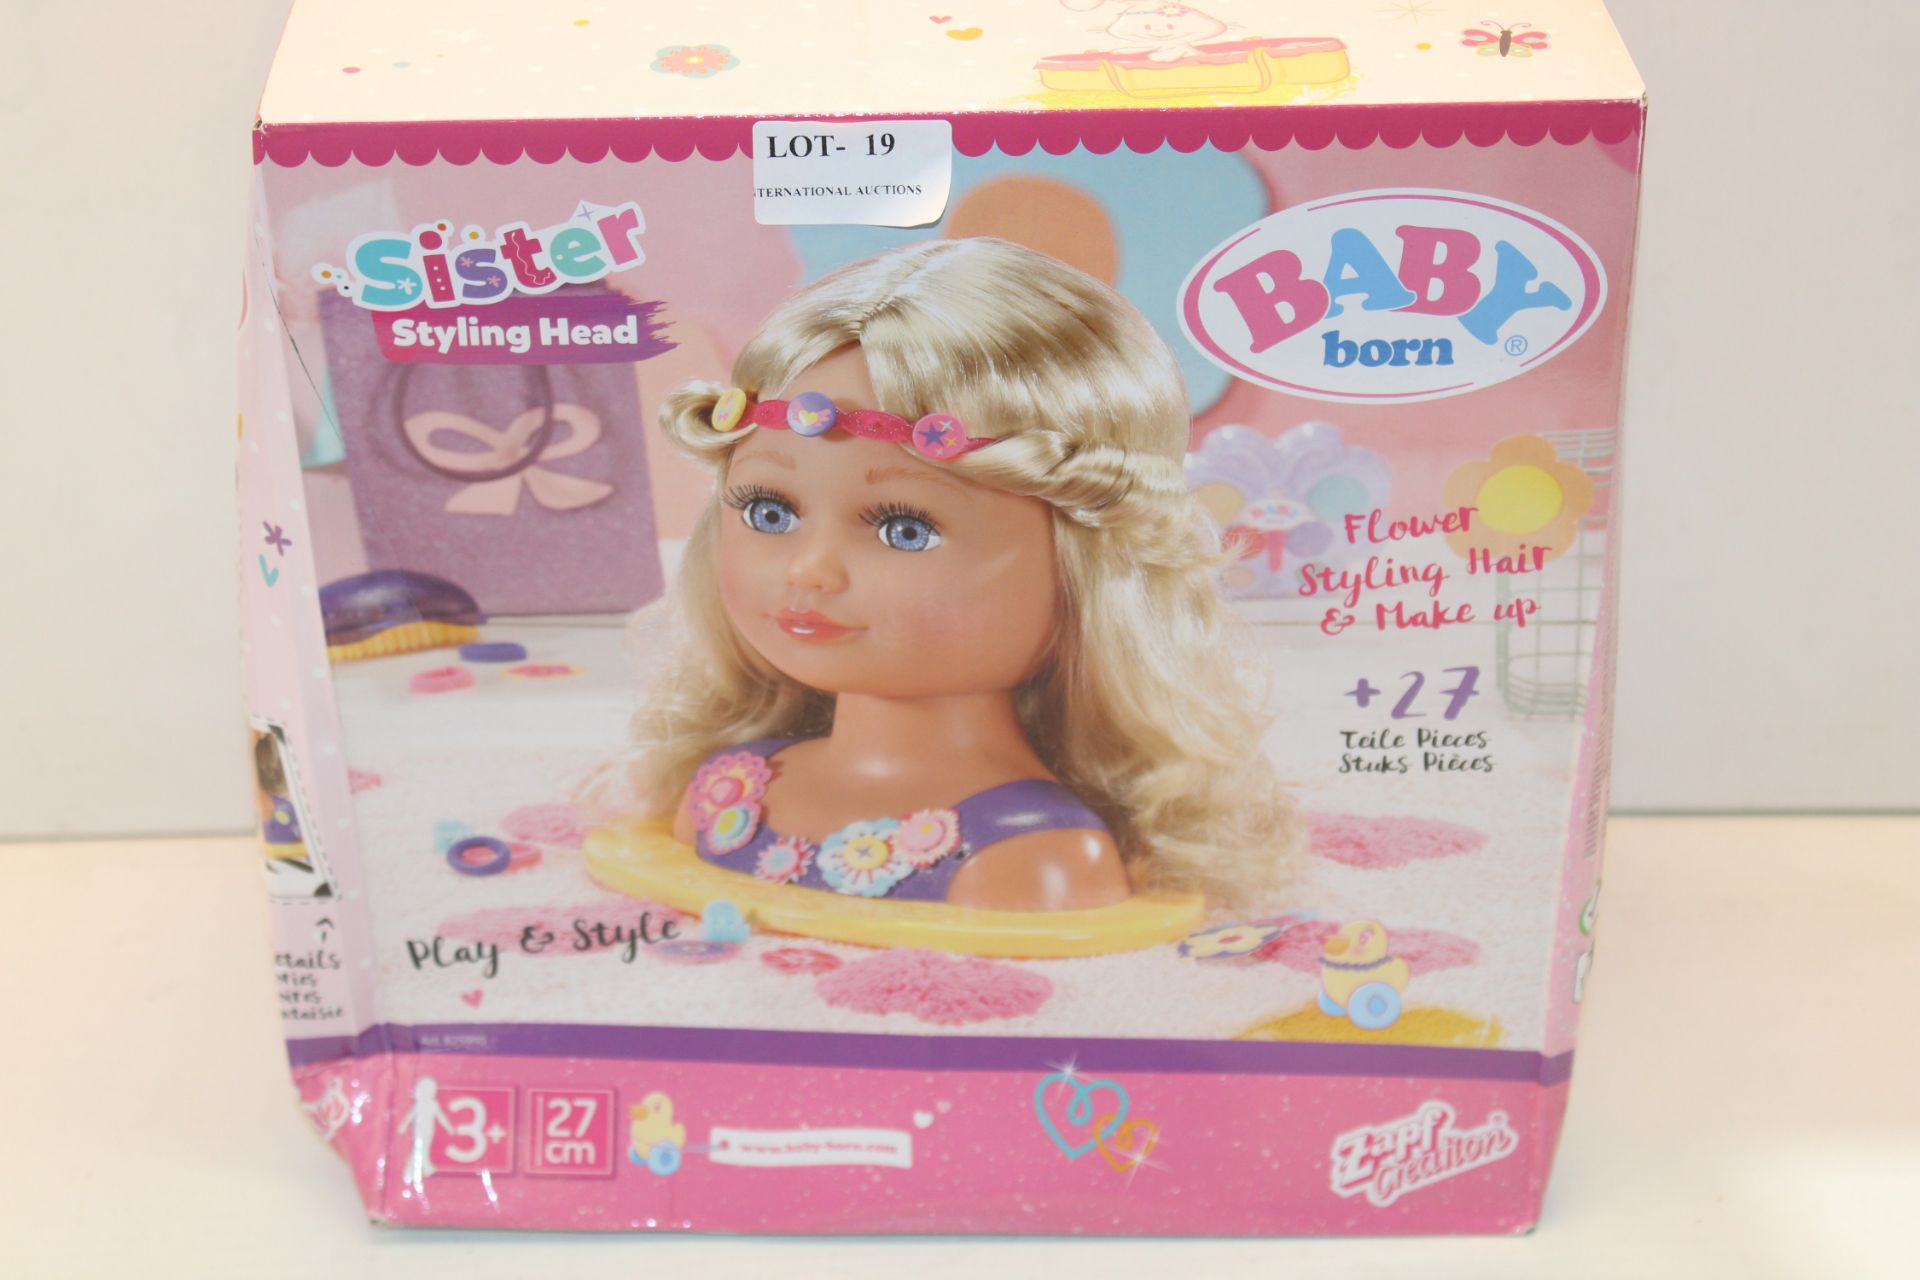 BOXED BABY BORN SISTER STYLING HEAD Condition ReportAppraisal Available on Request- All Items are